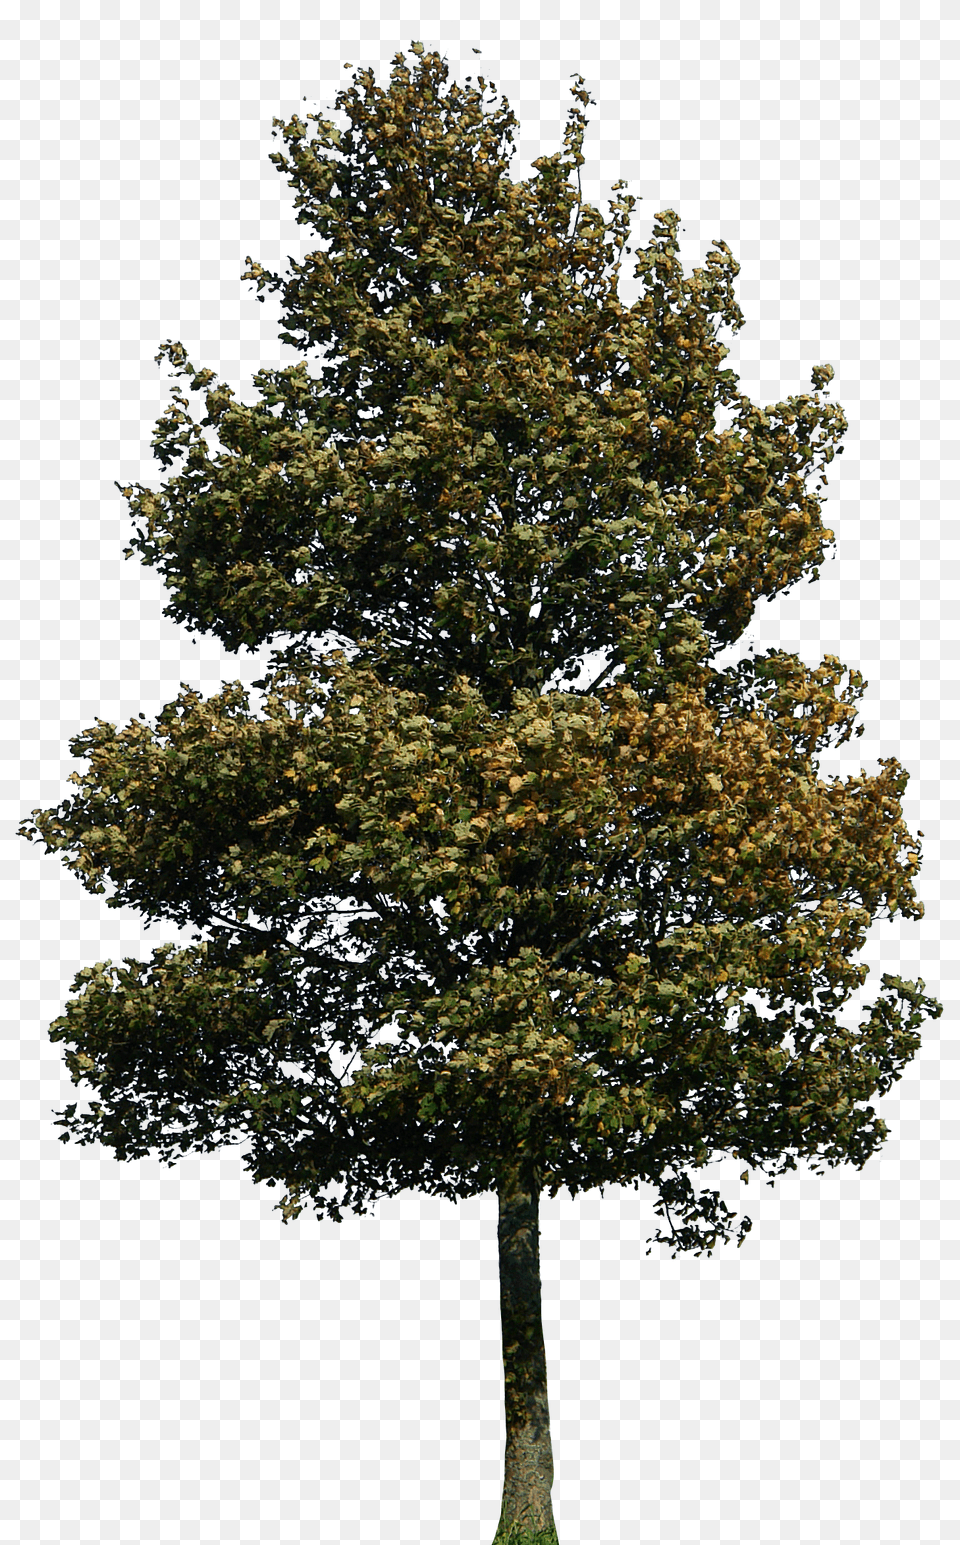 Tree Images Architecture Tree Elevation, Plant, Tree Trunk, Oak, Sycamore Png